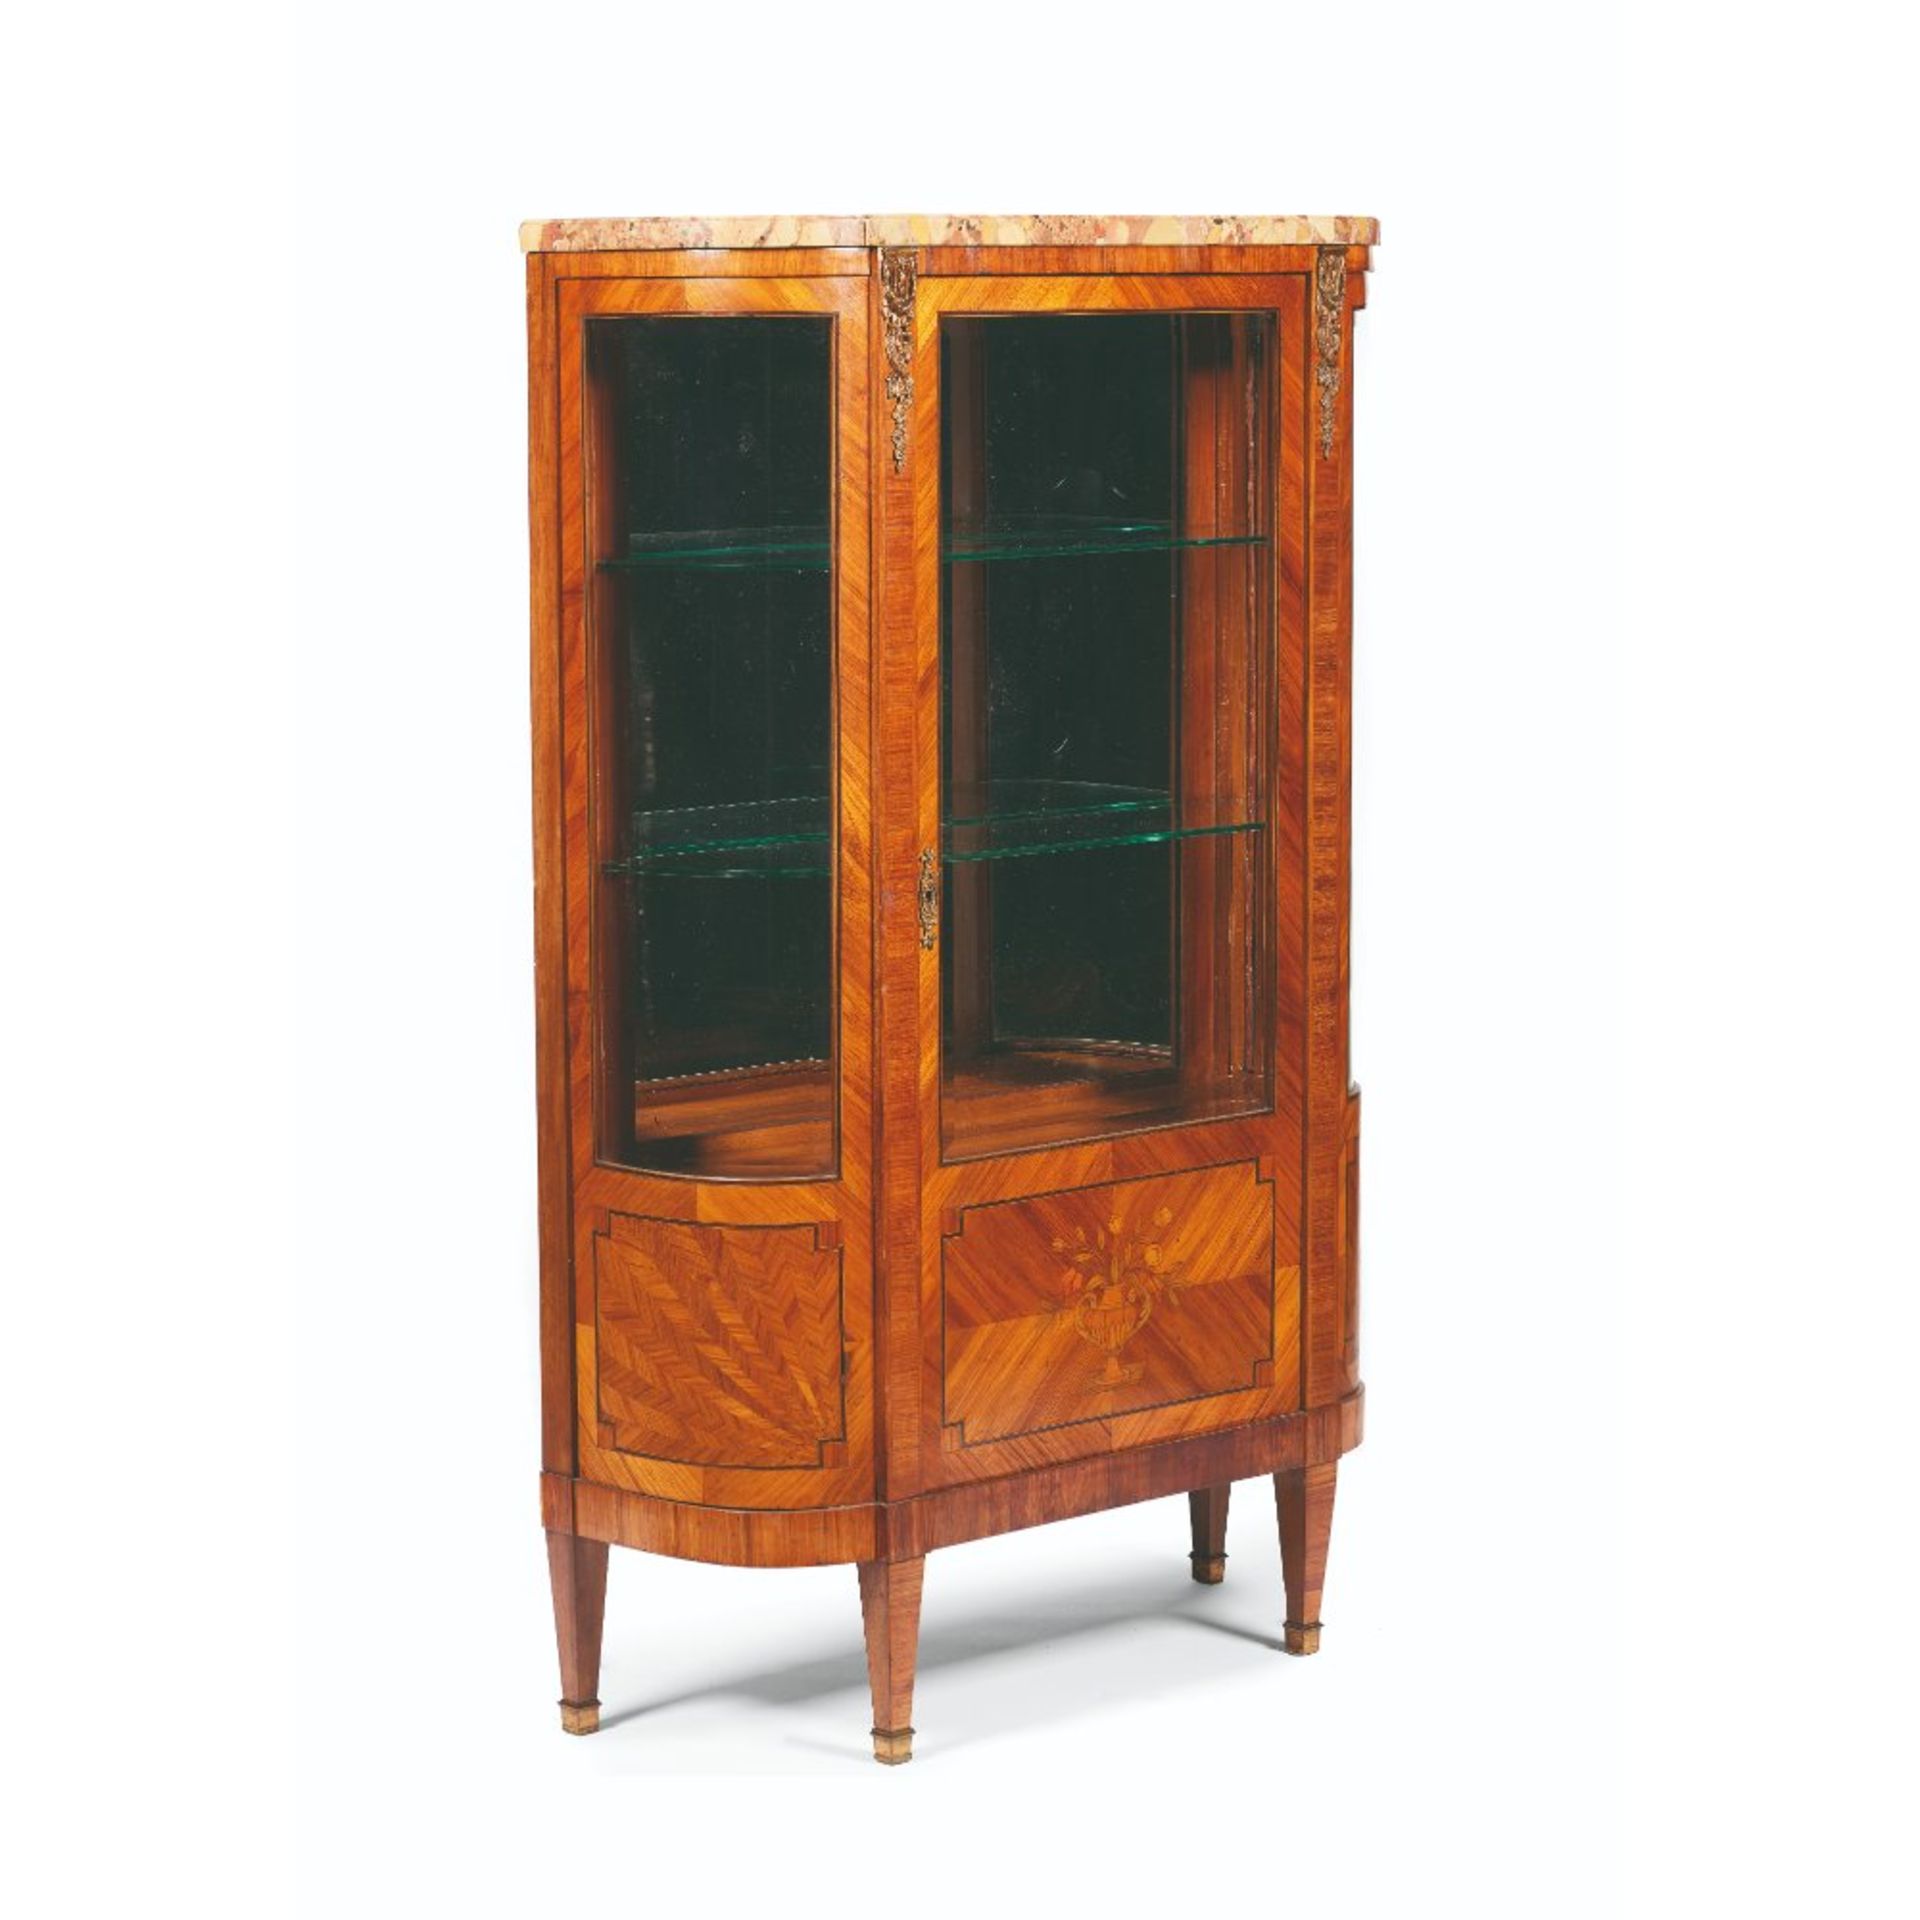 A Pair of Louis XVI style display cabinets - Image 3 of 3